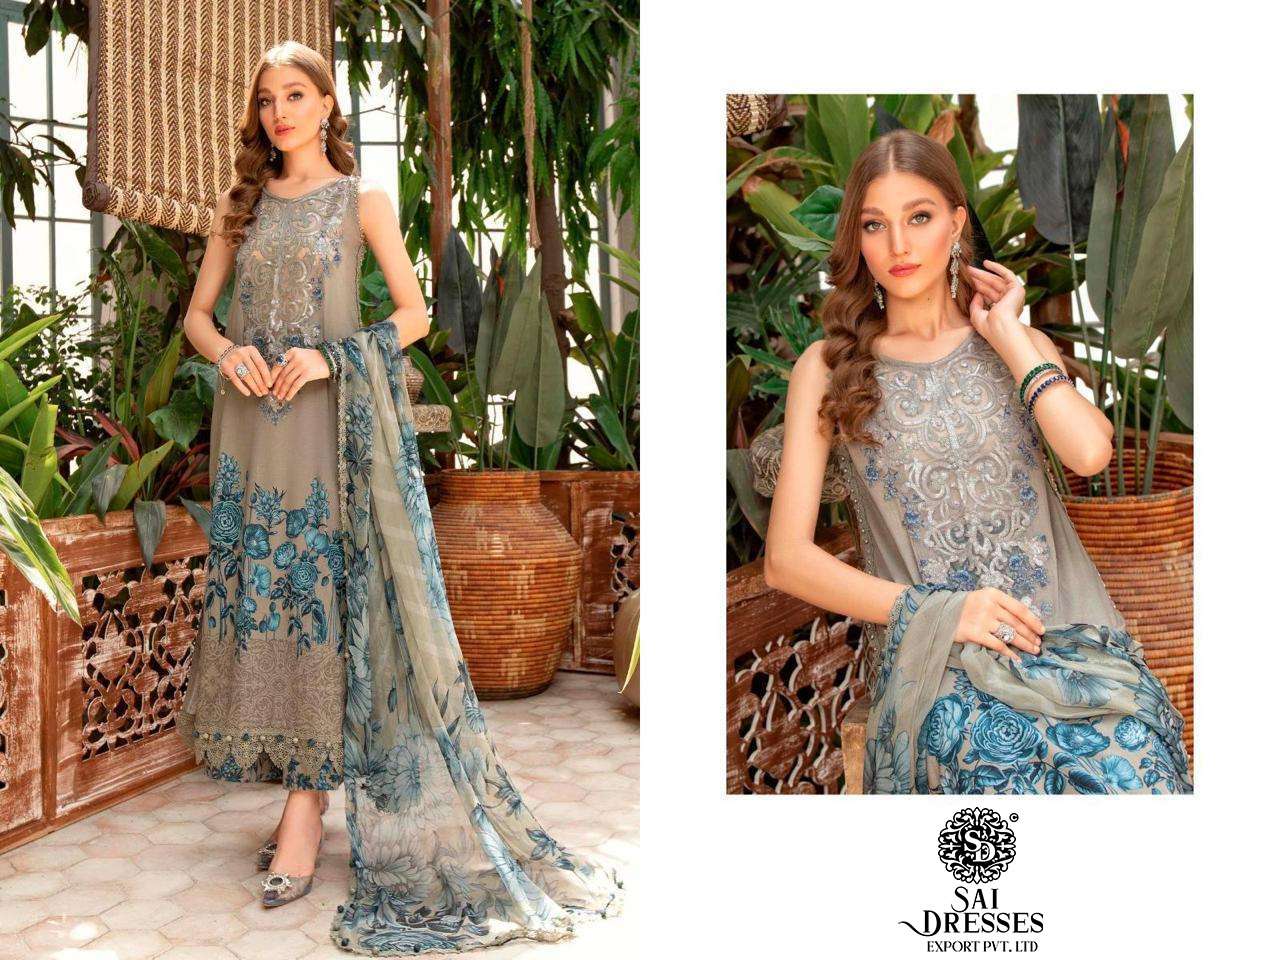 SAI DRESSES PRESENT MARIA B M PRINT SPRING SUMMER 23 VOL 3 PURE COTTON HEAVY PATCH EMBROIDERED PAKISTANI SALWAR SUITS IN WHOLESALE RATE IN SURAT